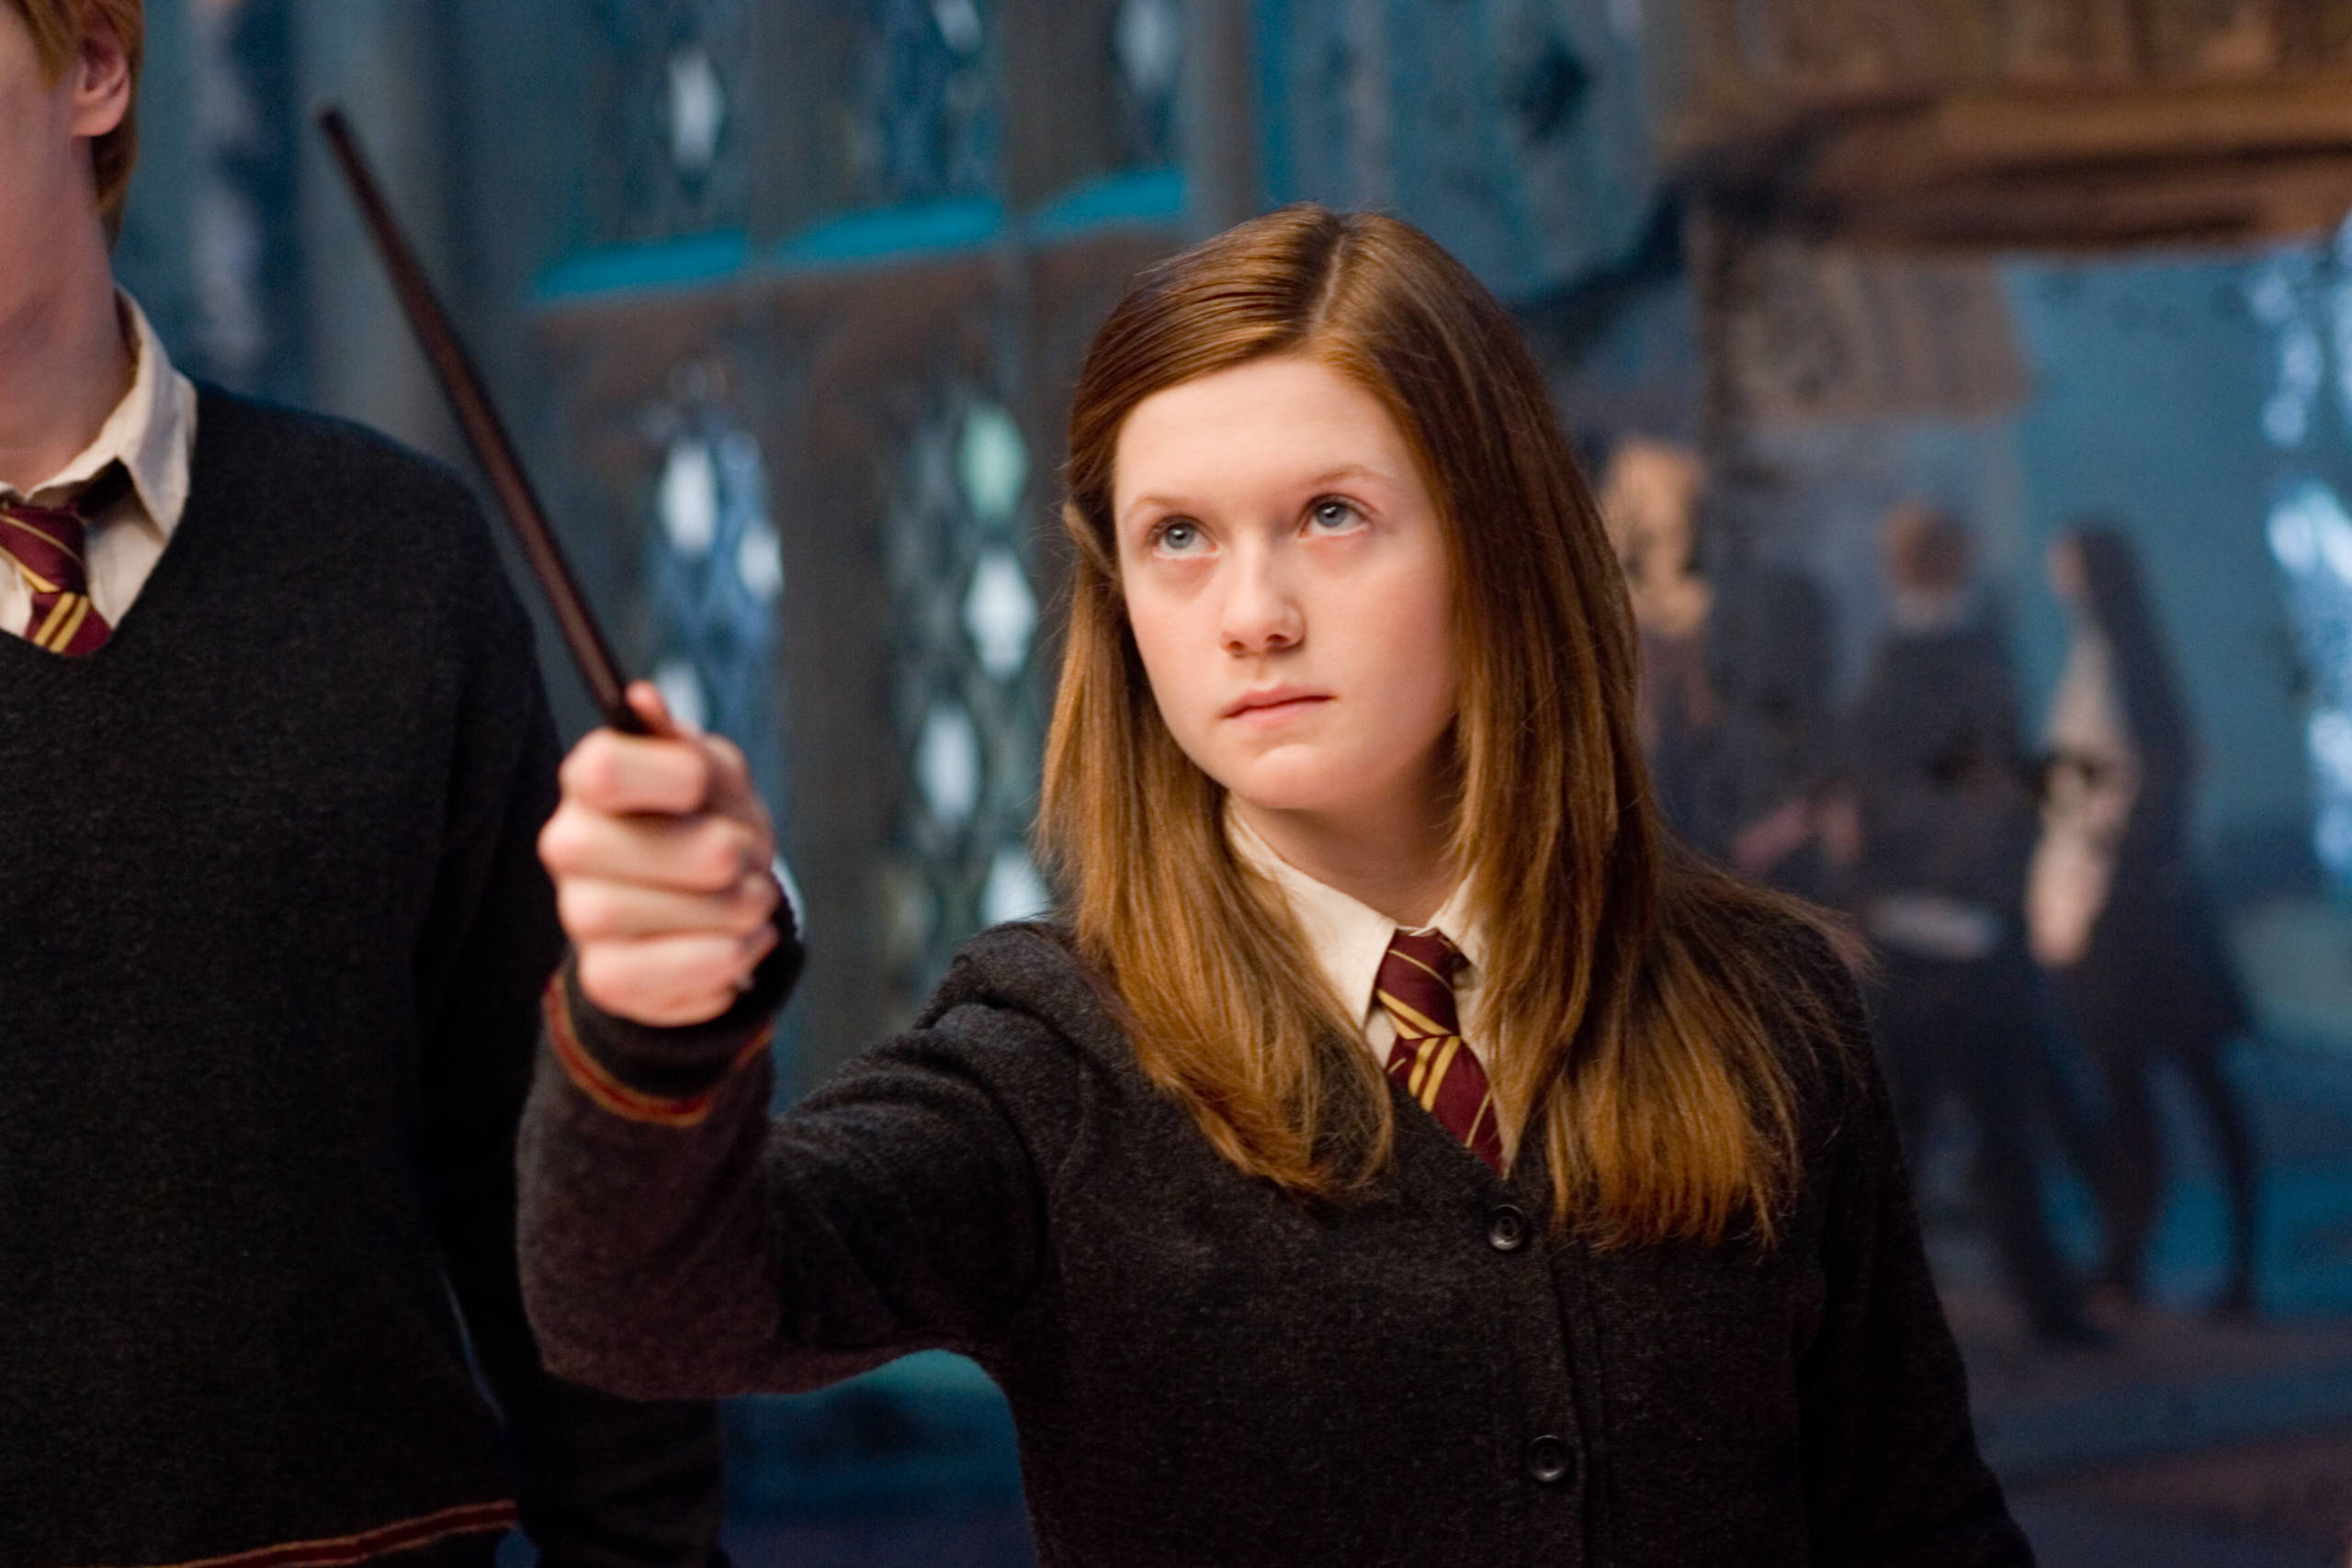 Ginny pointing her wand in the Room of Requiremnt 